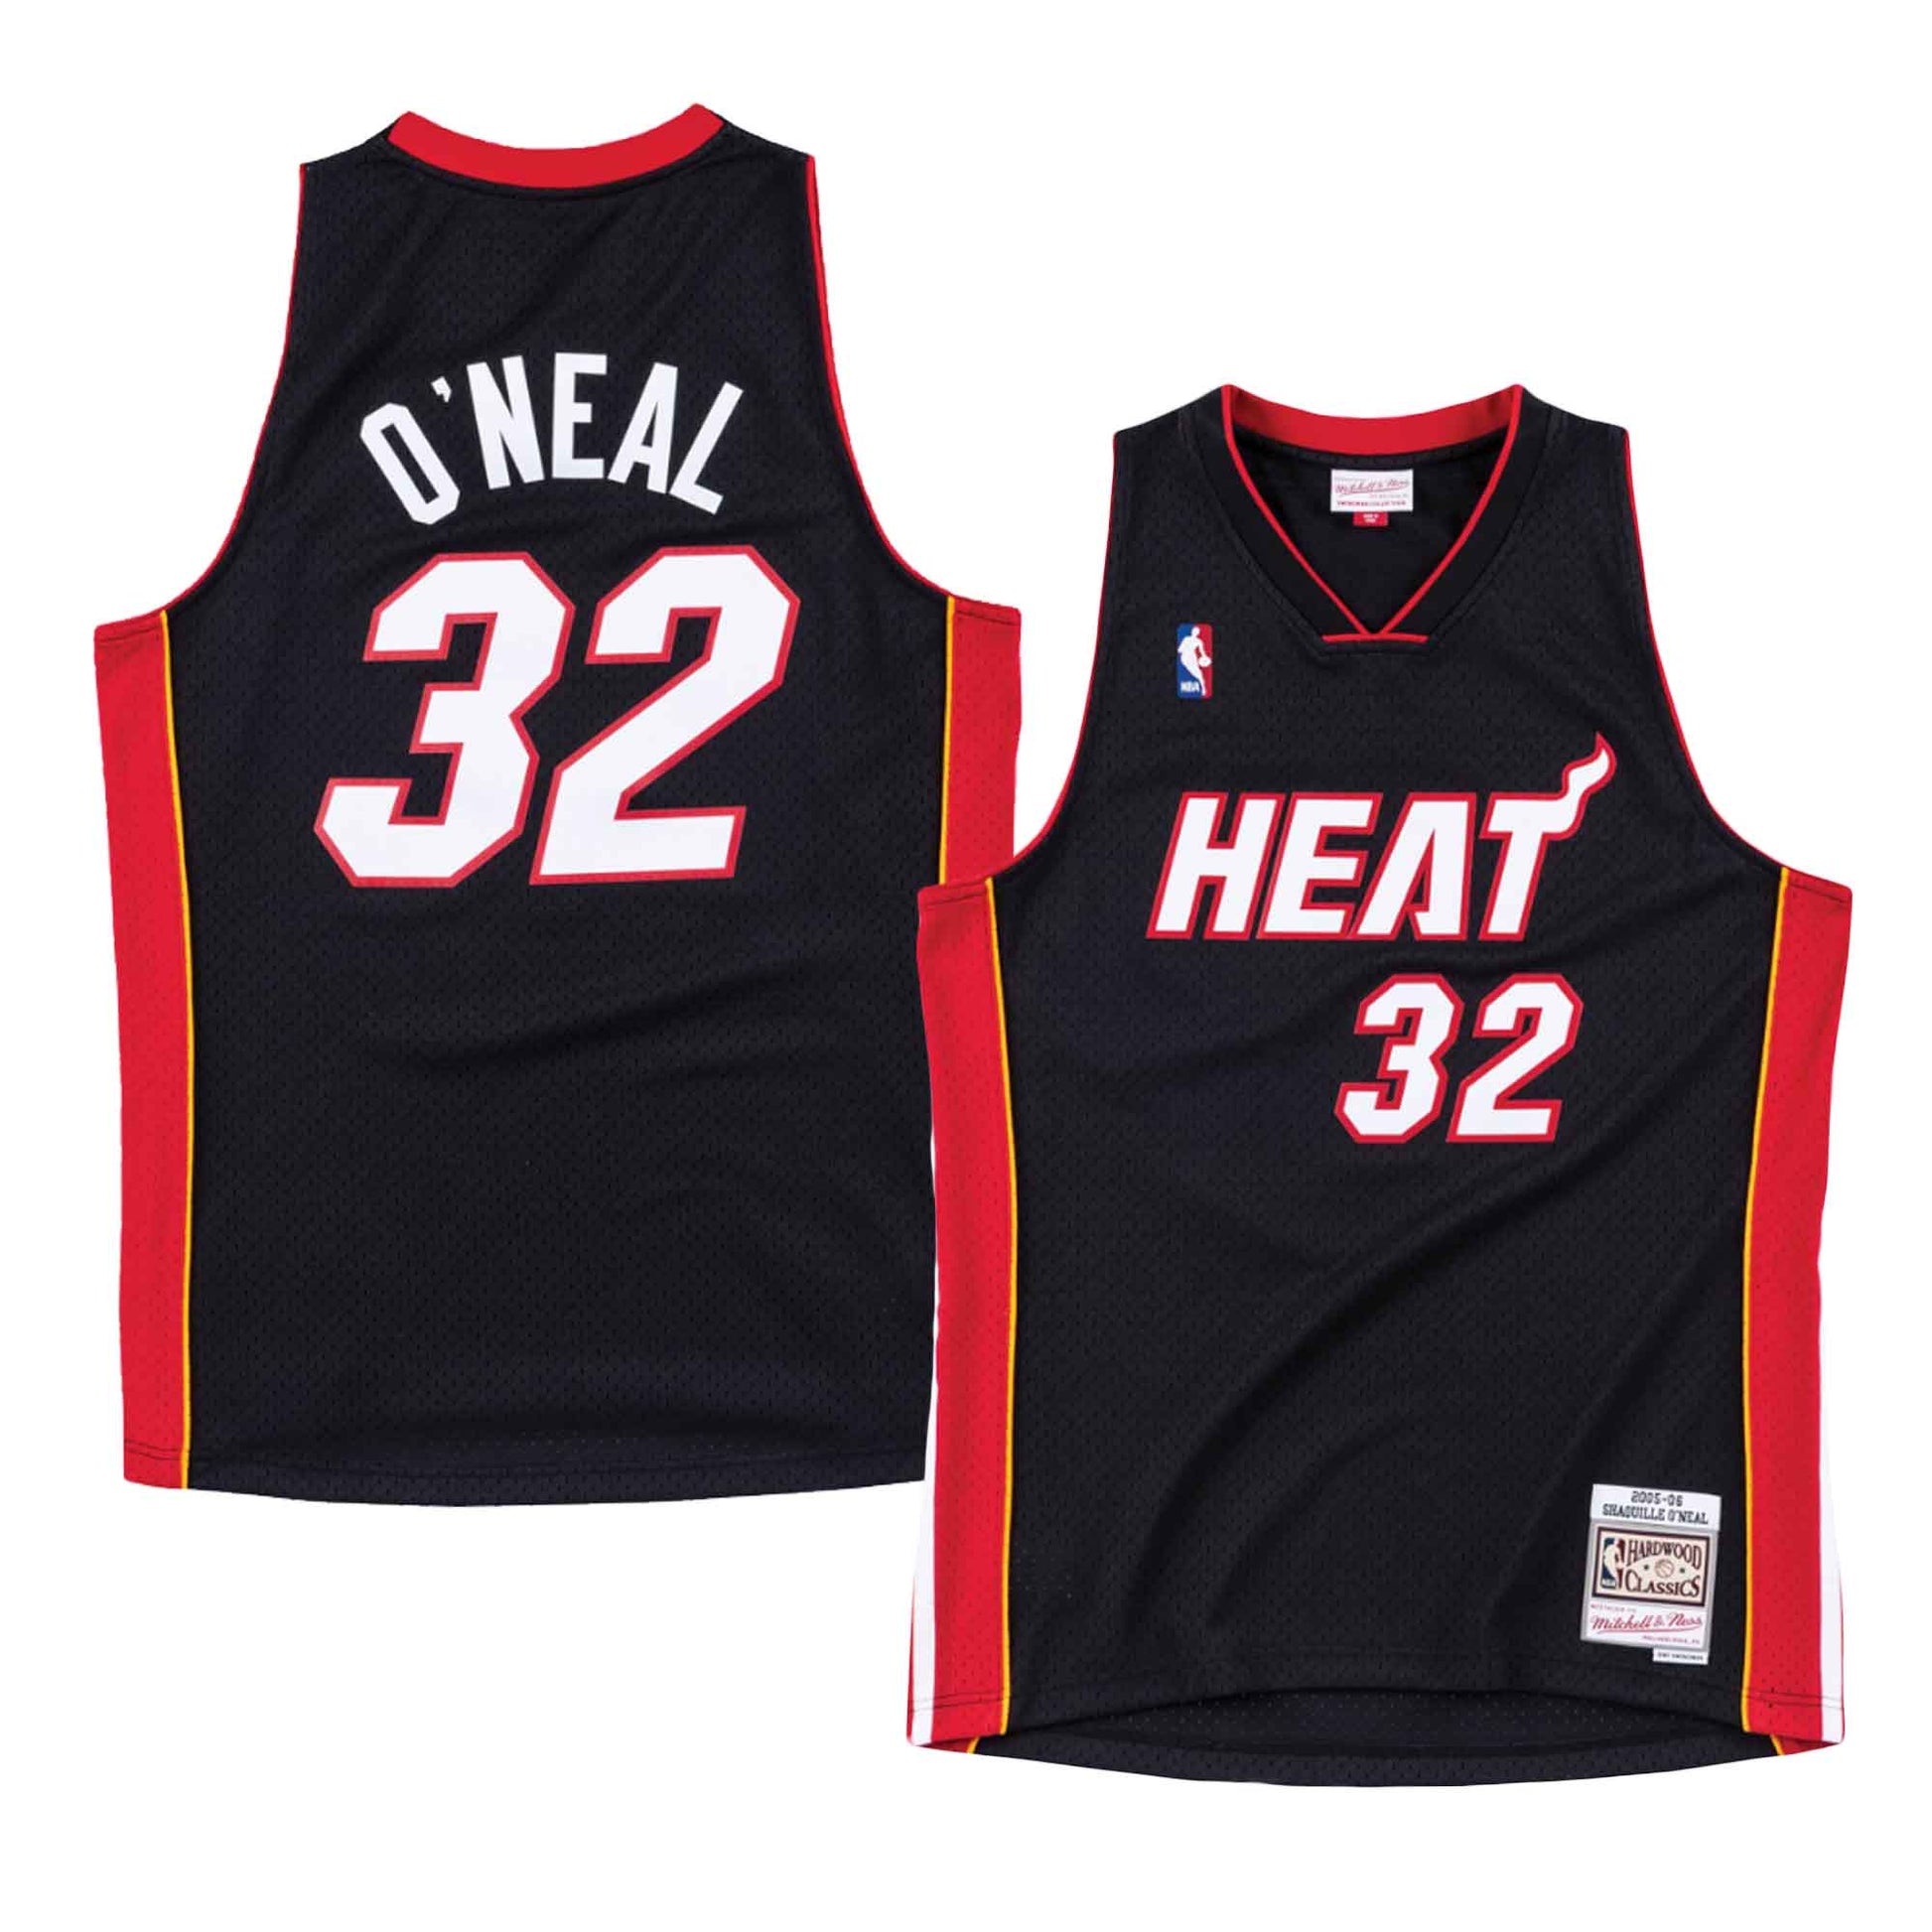 Authentic Jersey Miami Heat Alternate 2005-06 Shaquille O'Neal